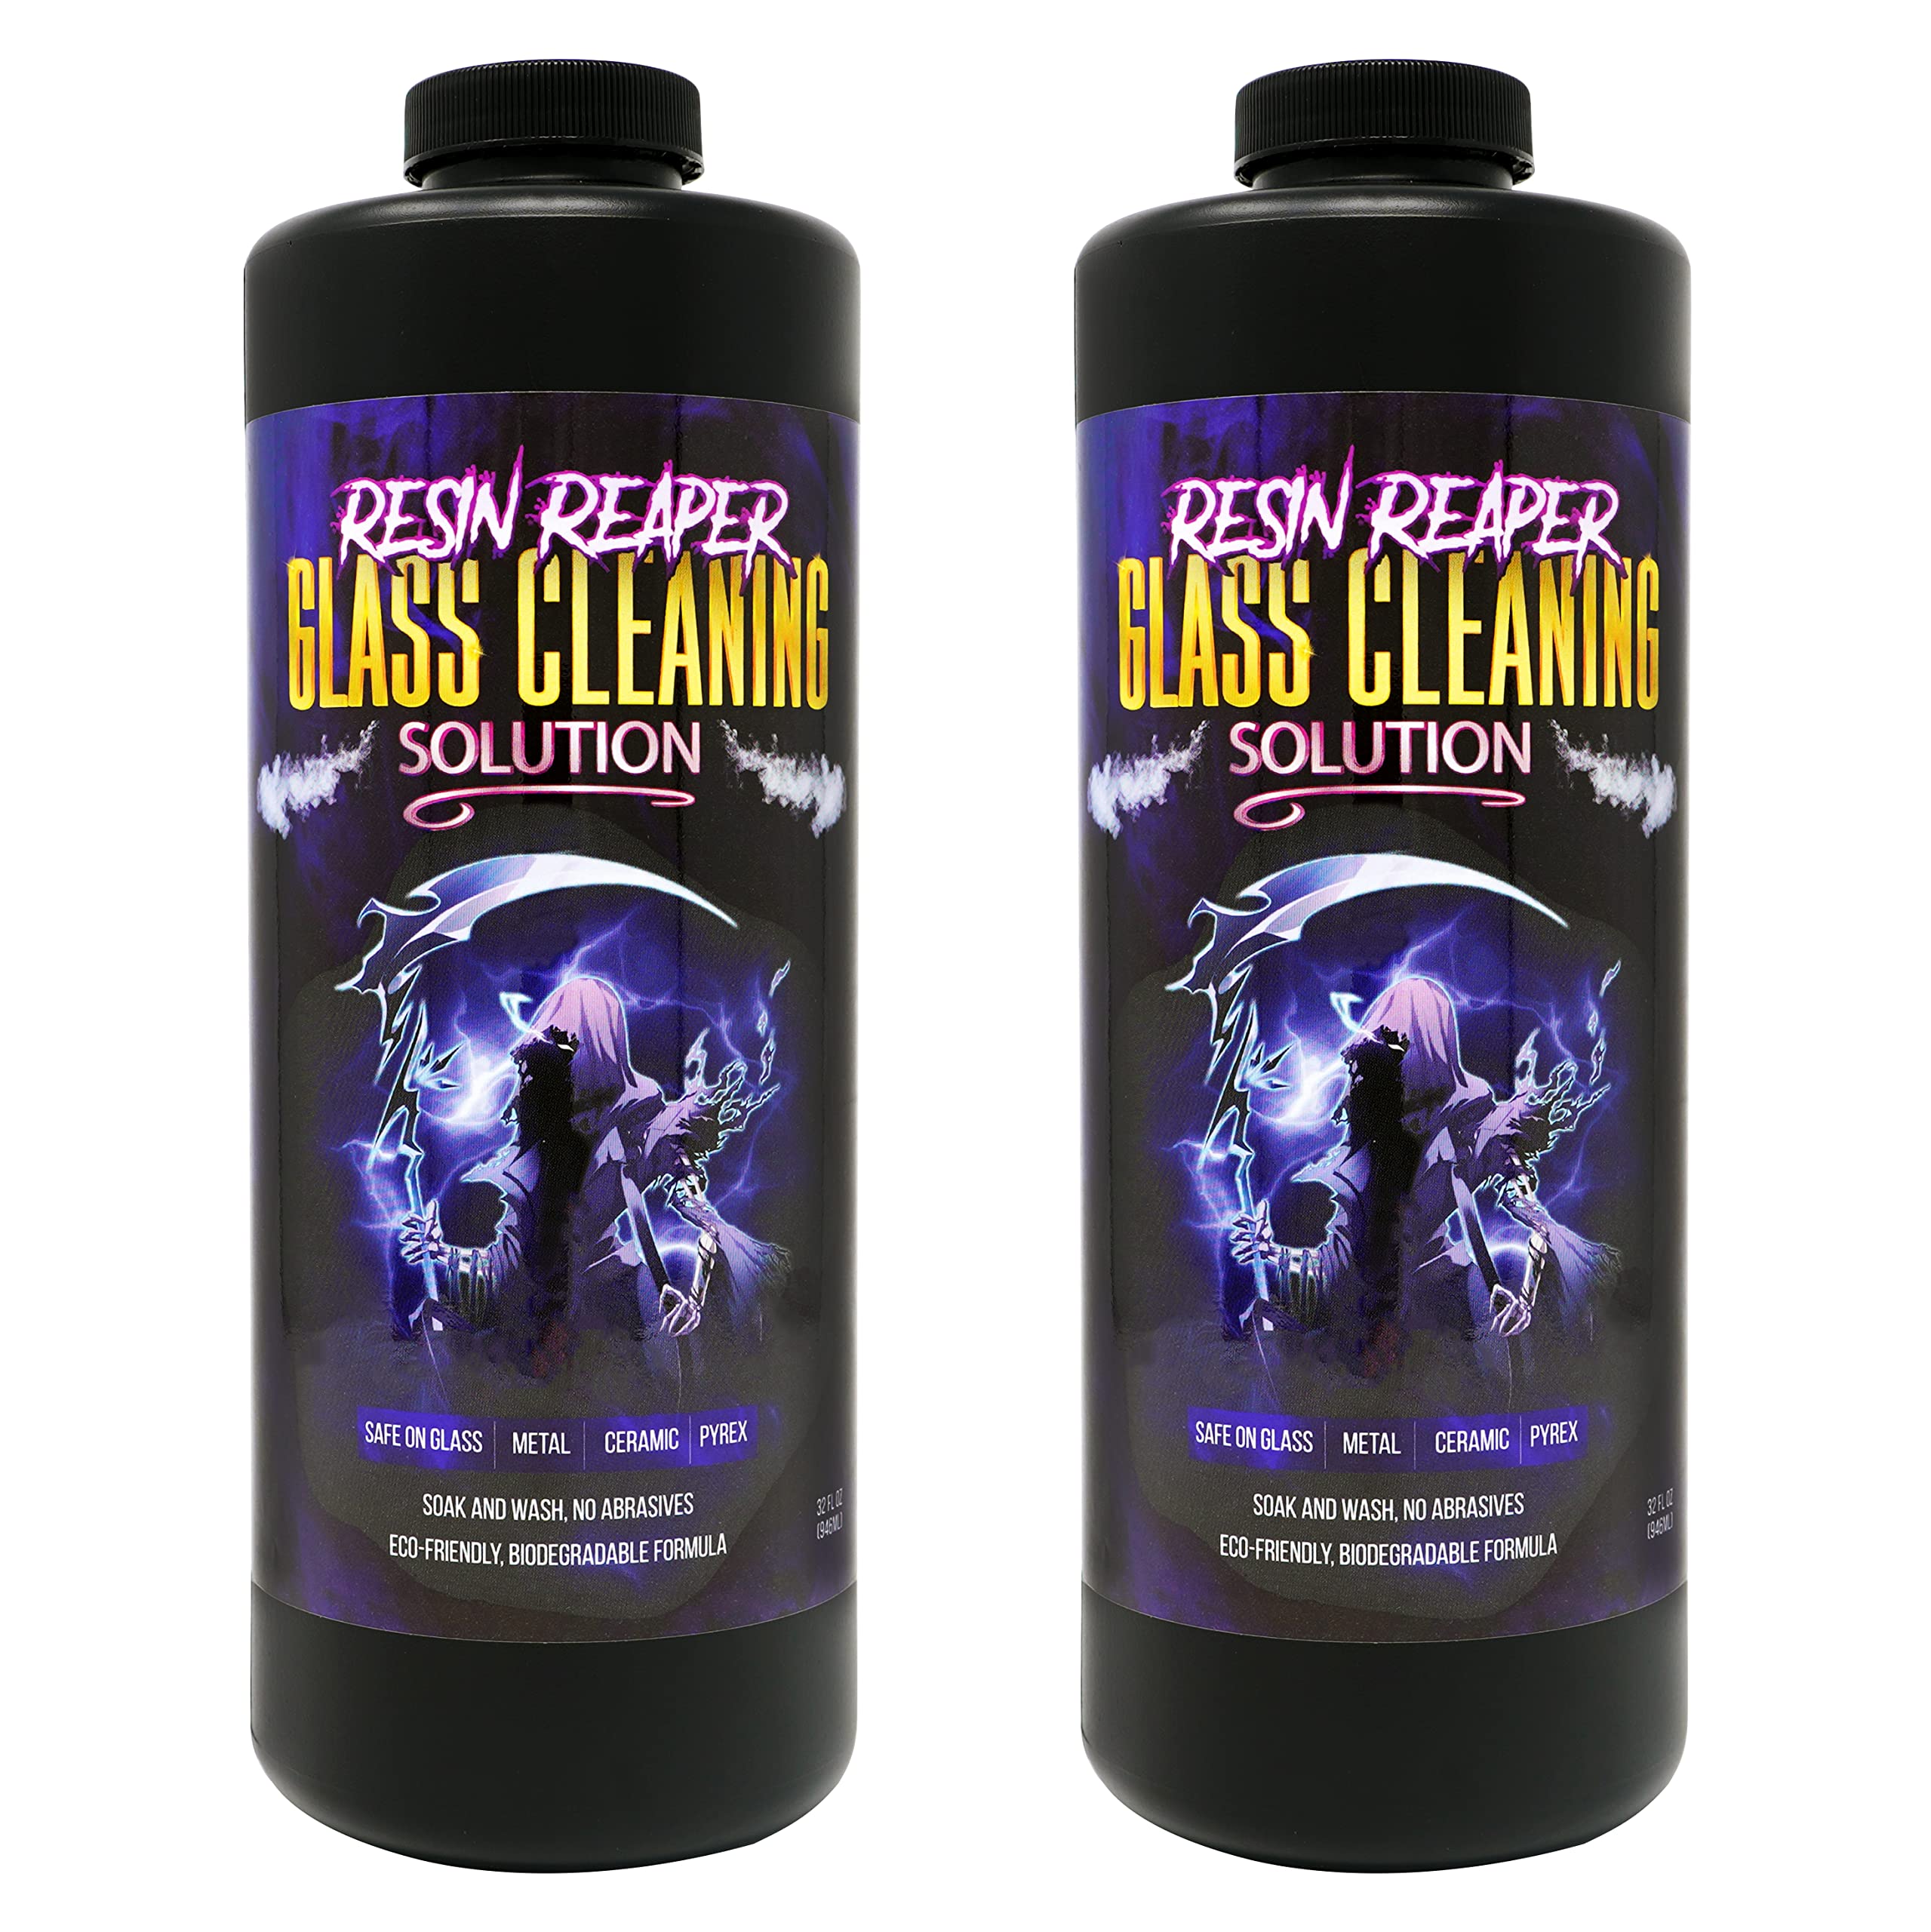 Resin Reaper Glass Cleaner 2-Pack 64 OZ, Pipe Cleaner